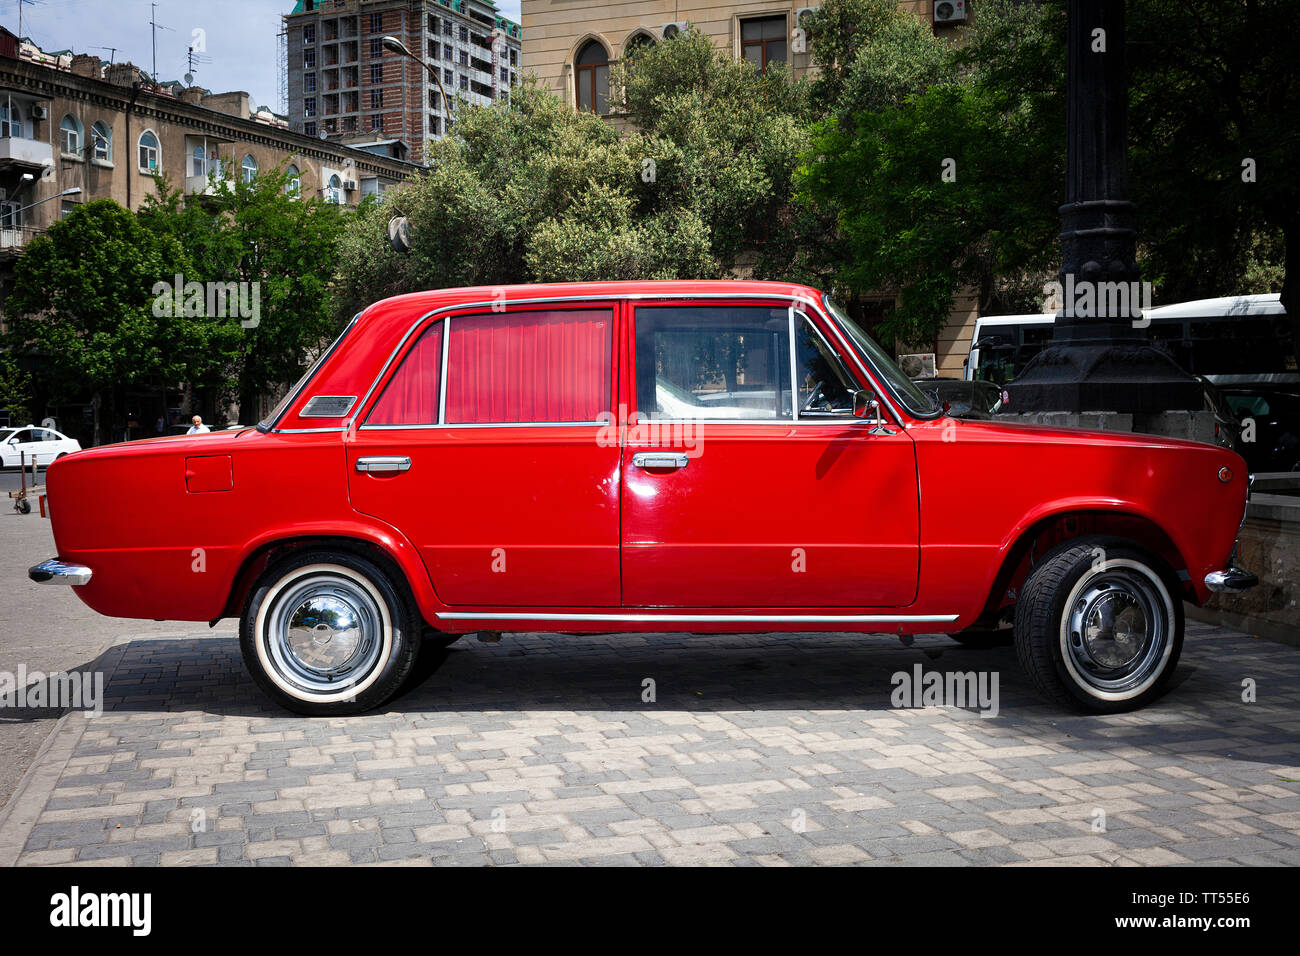 A new bright red Lada motor vehicle parked in Central Baku, Azerbaijan Stock Photo